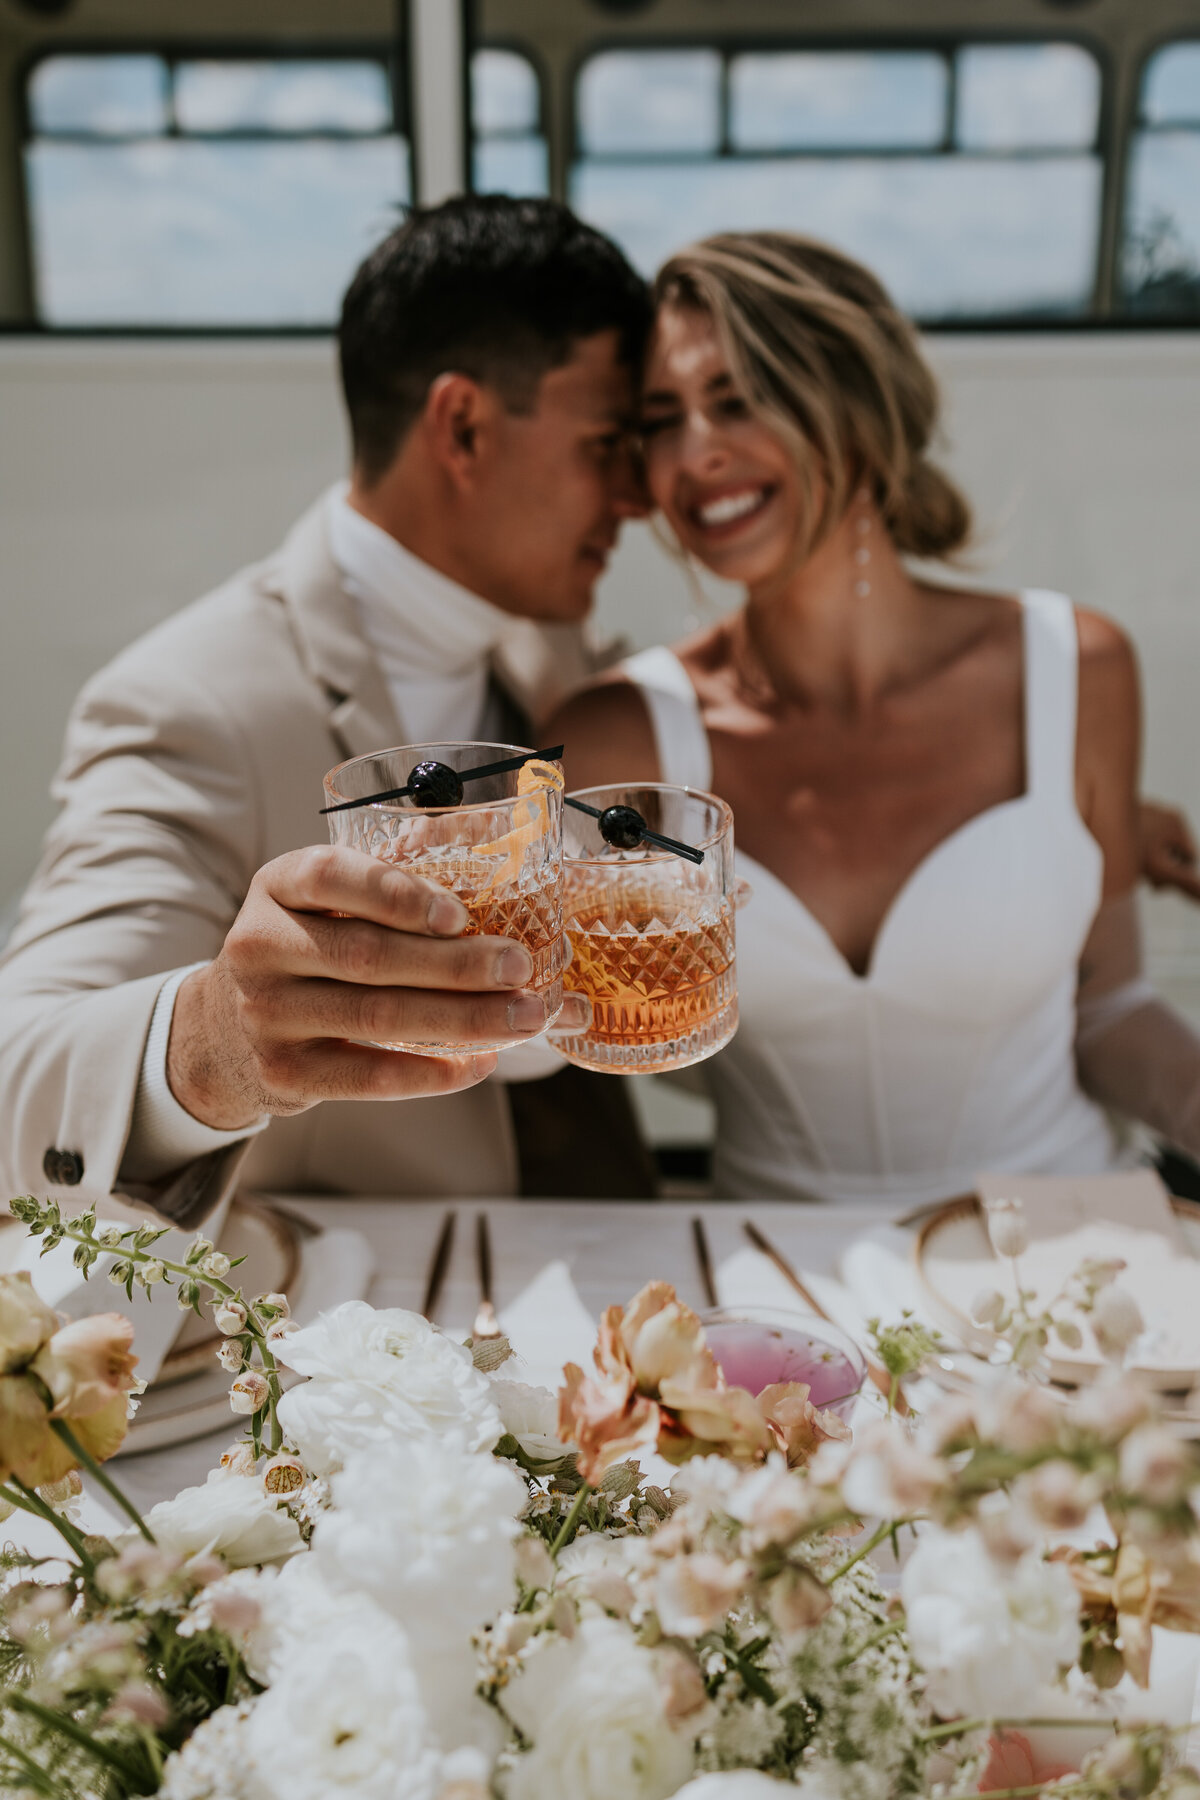 Bride and groom laugh while toasting together.